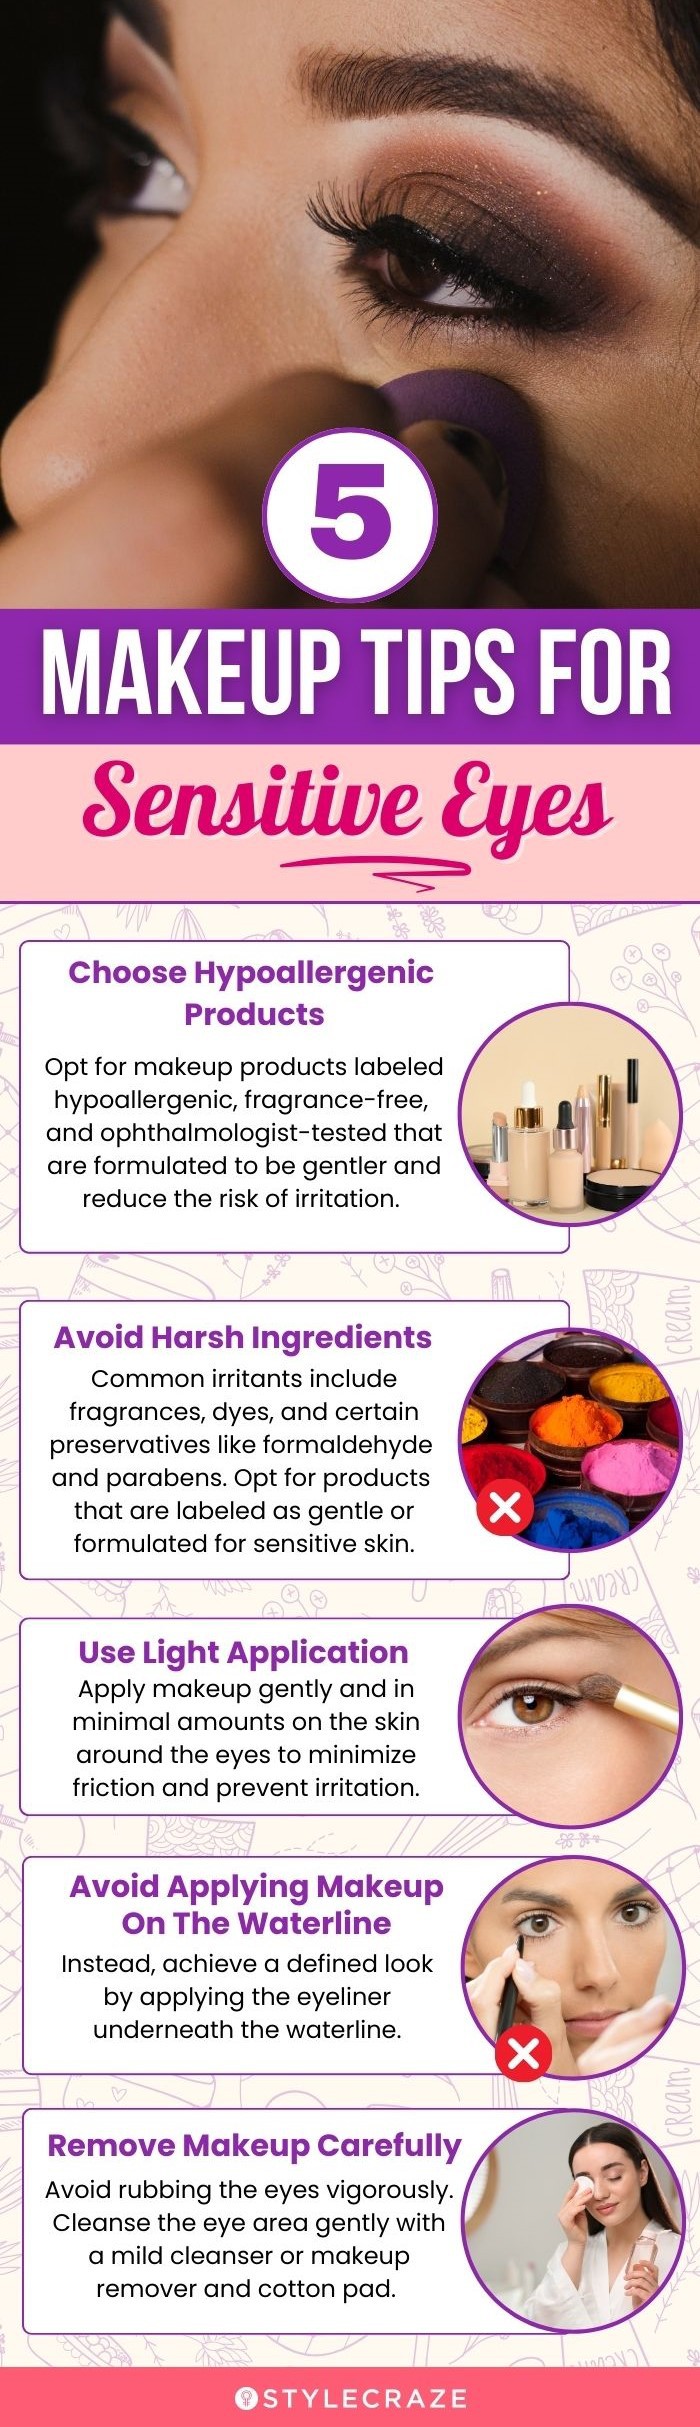 Face Paints & Makeup: Choose Carefully to Avoid Toxic Ingredients 